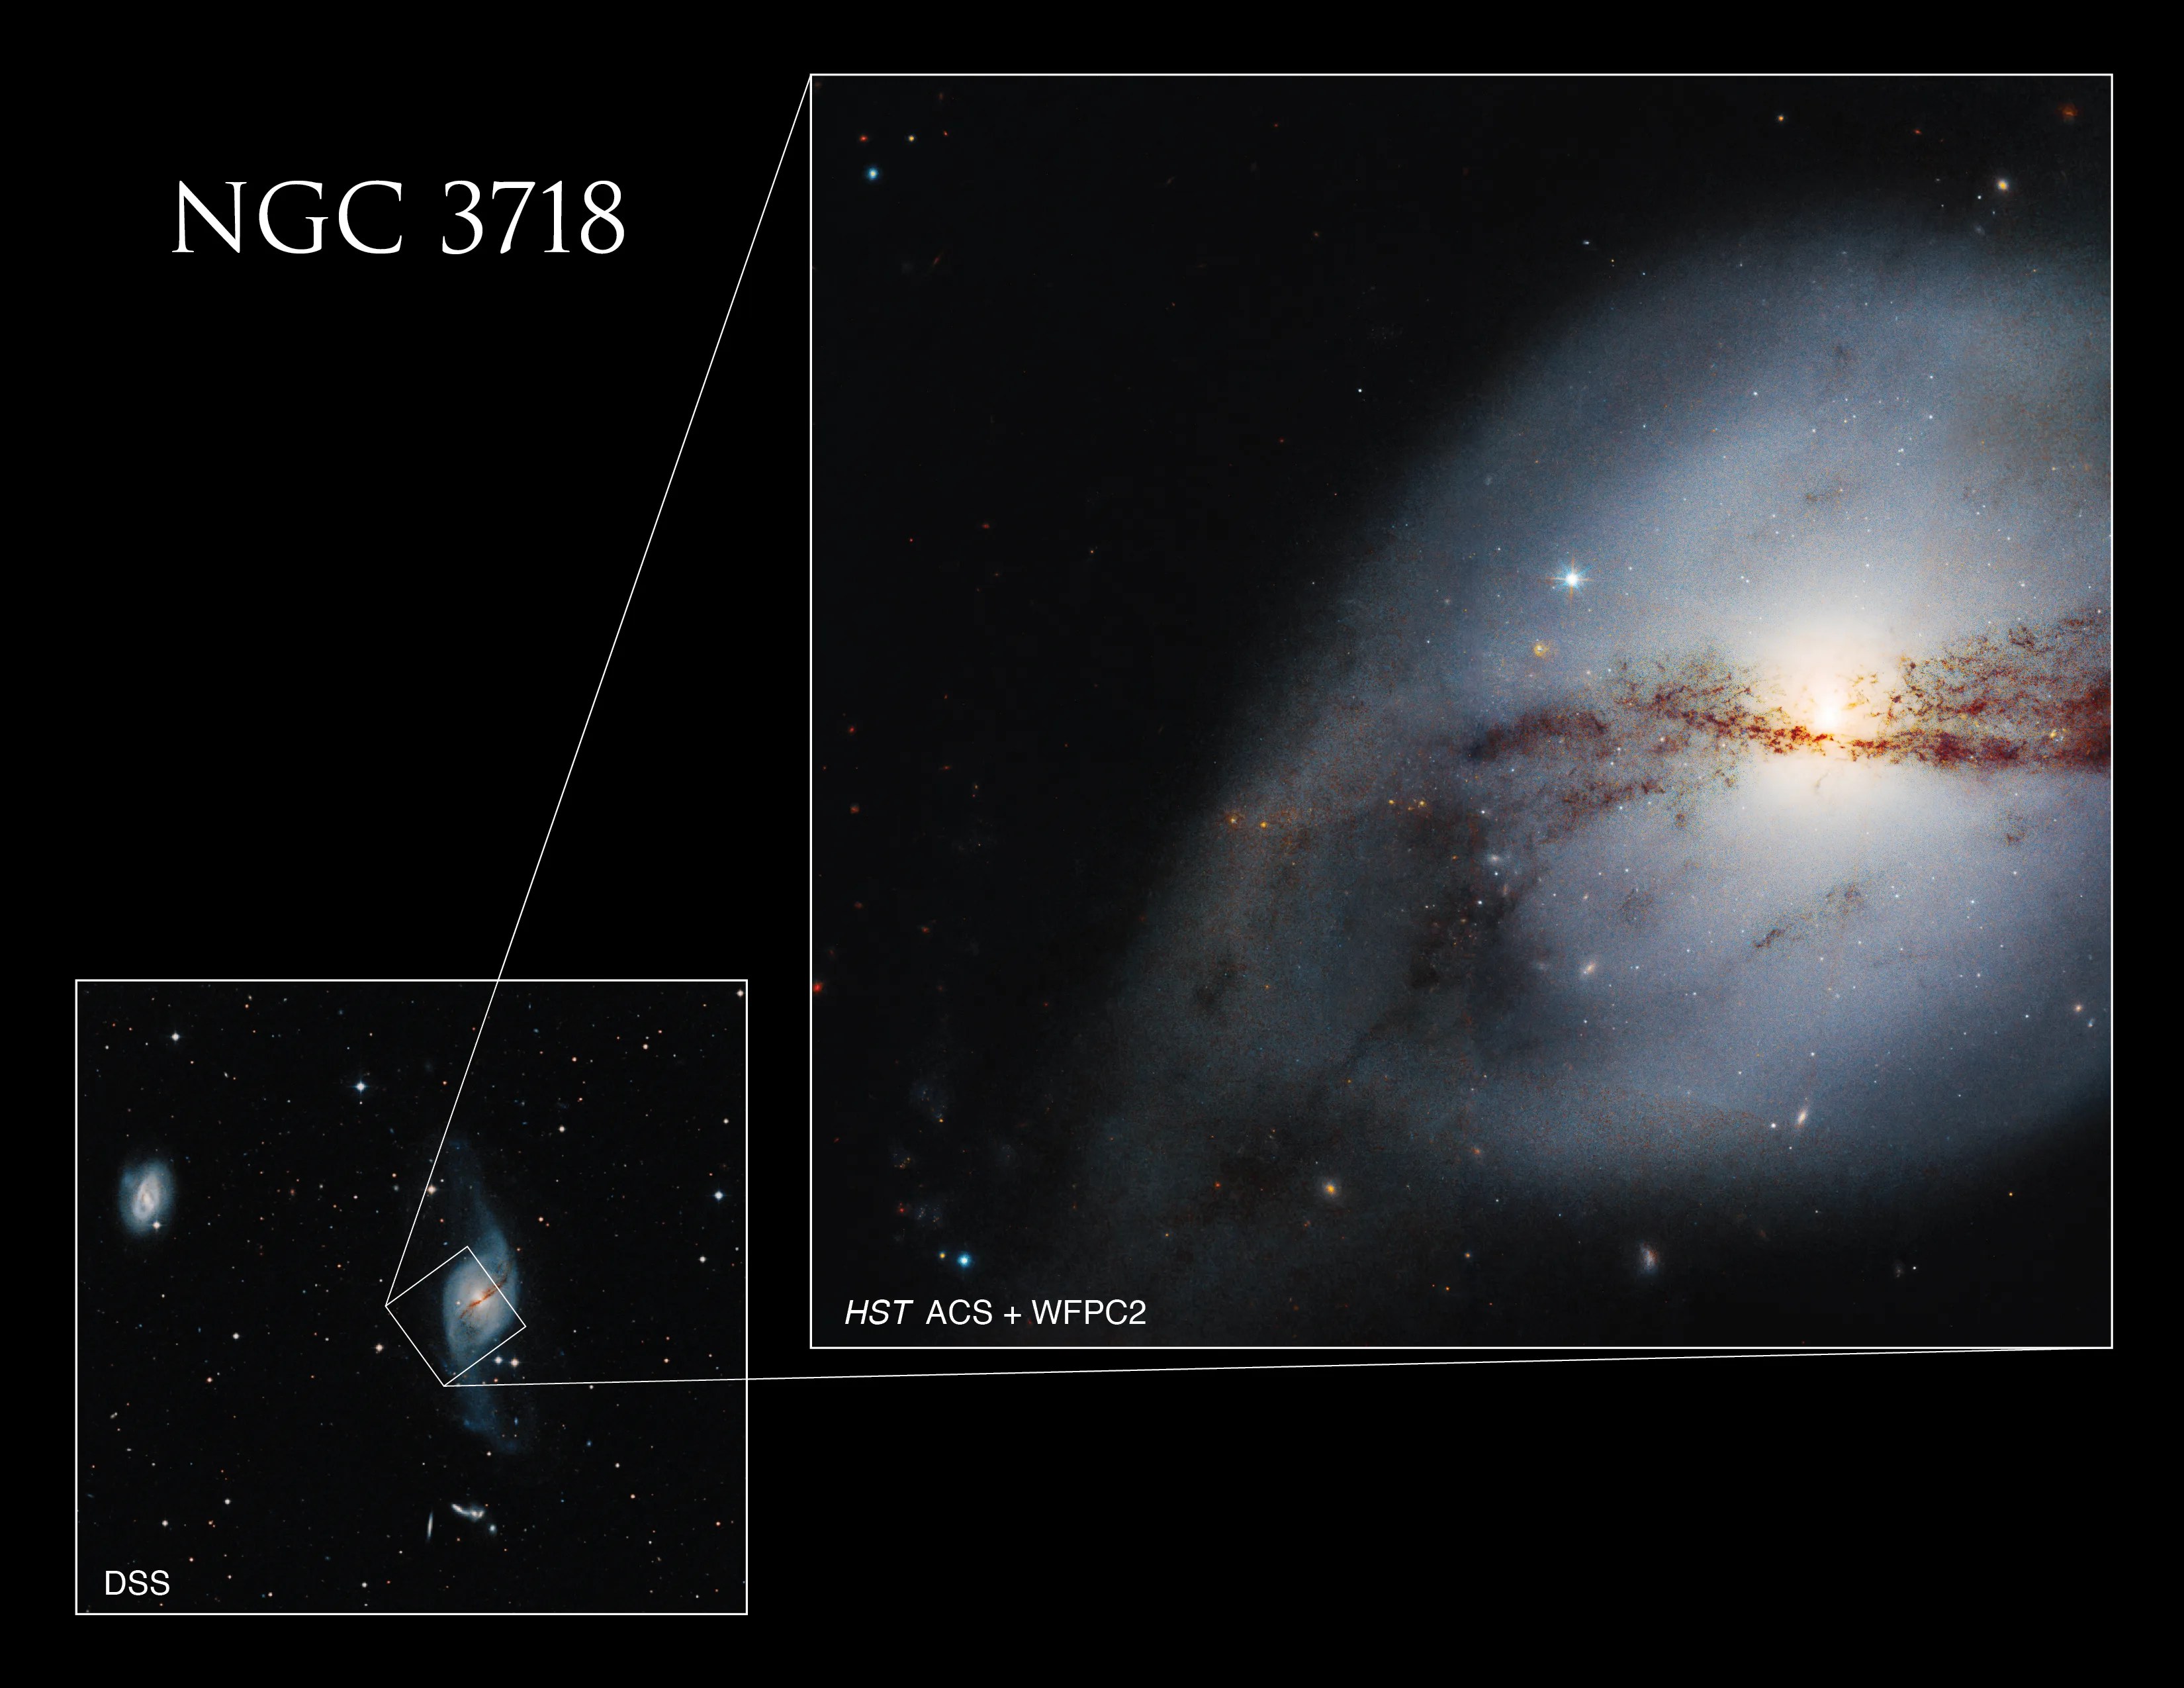 lower left inset: center of image NGC 3718, upper left a distant spiral galaxy, stars dot the scene. right side of image: Hubble's view of NGC 3718